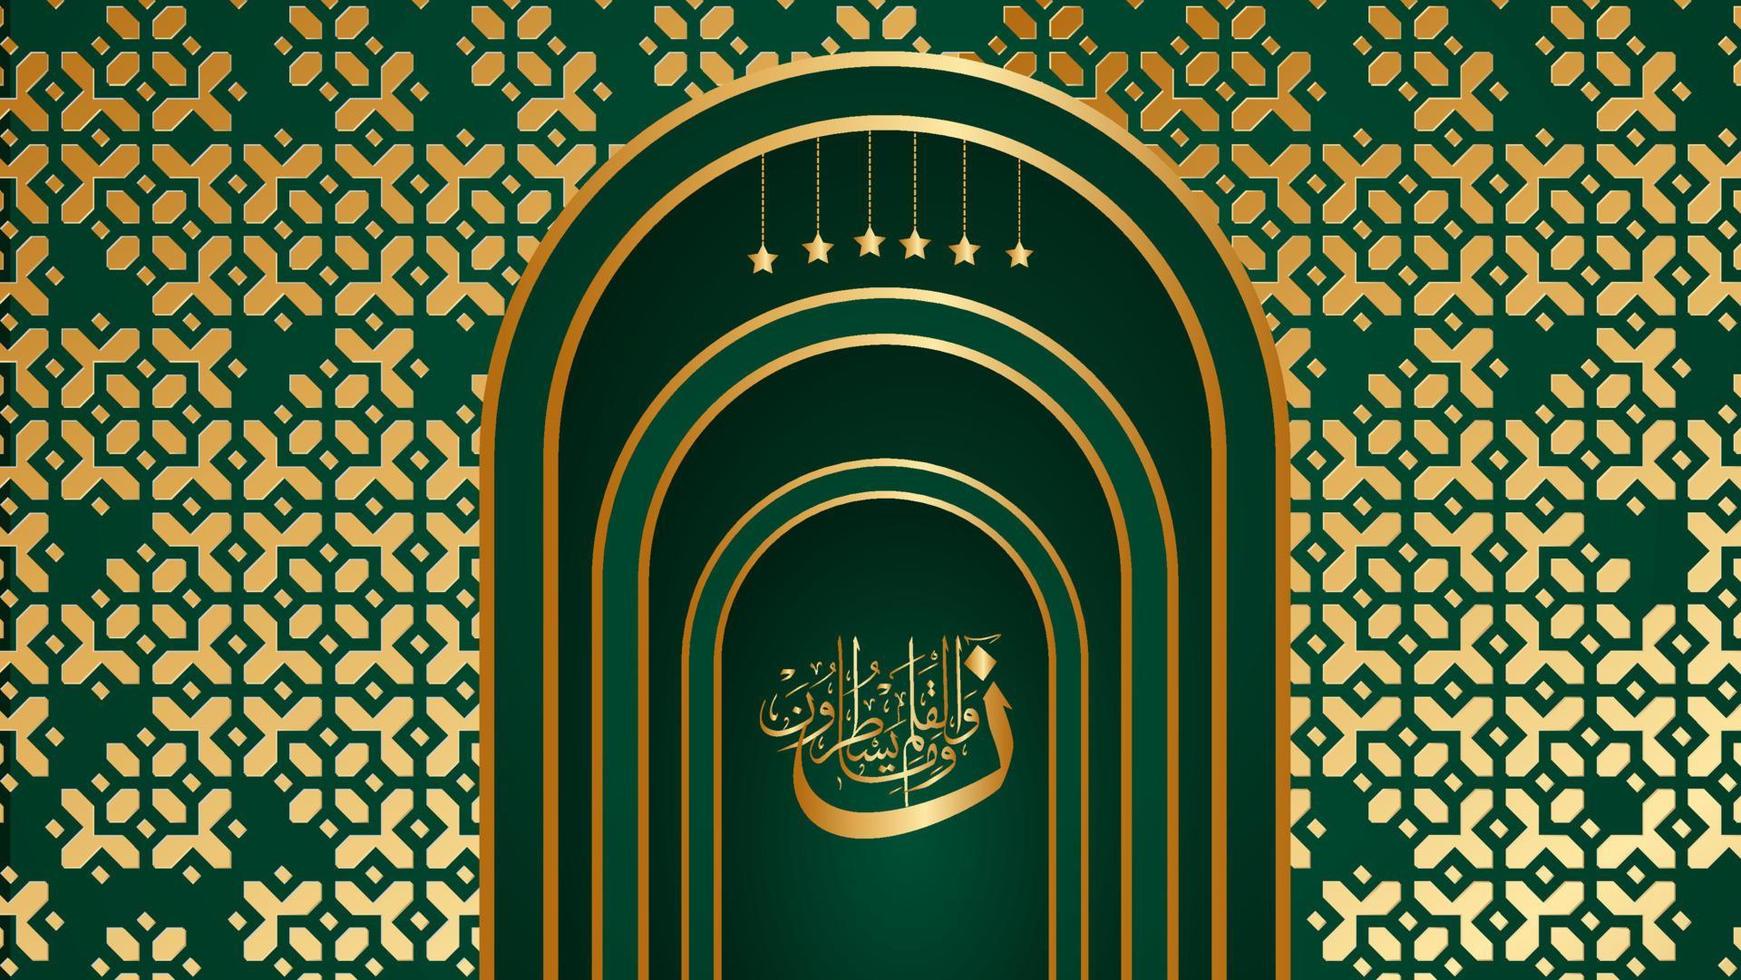 Arabian banner with green background and islamic pattern decoration vector